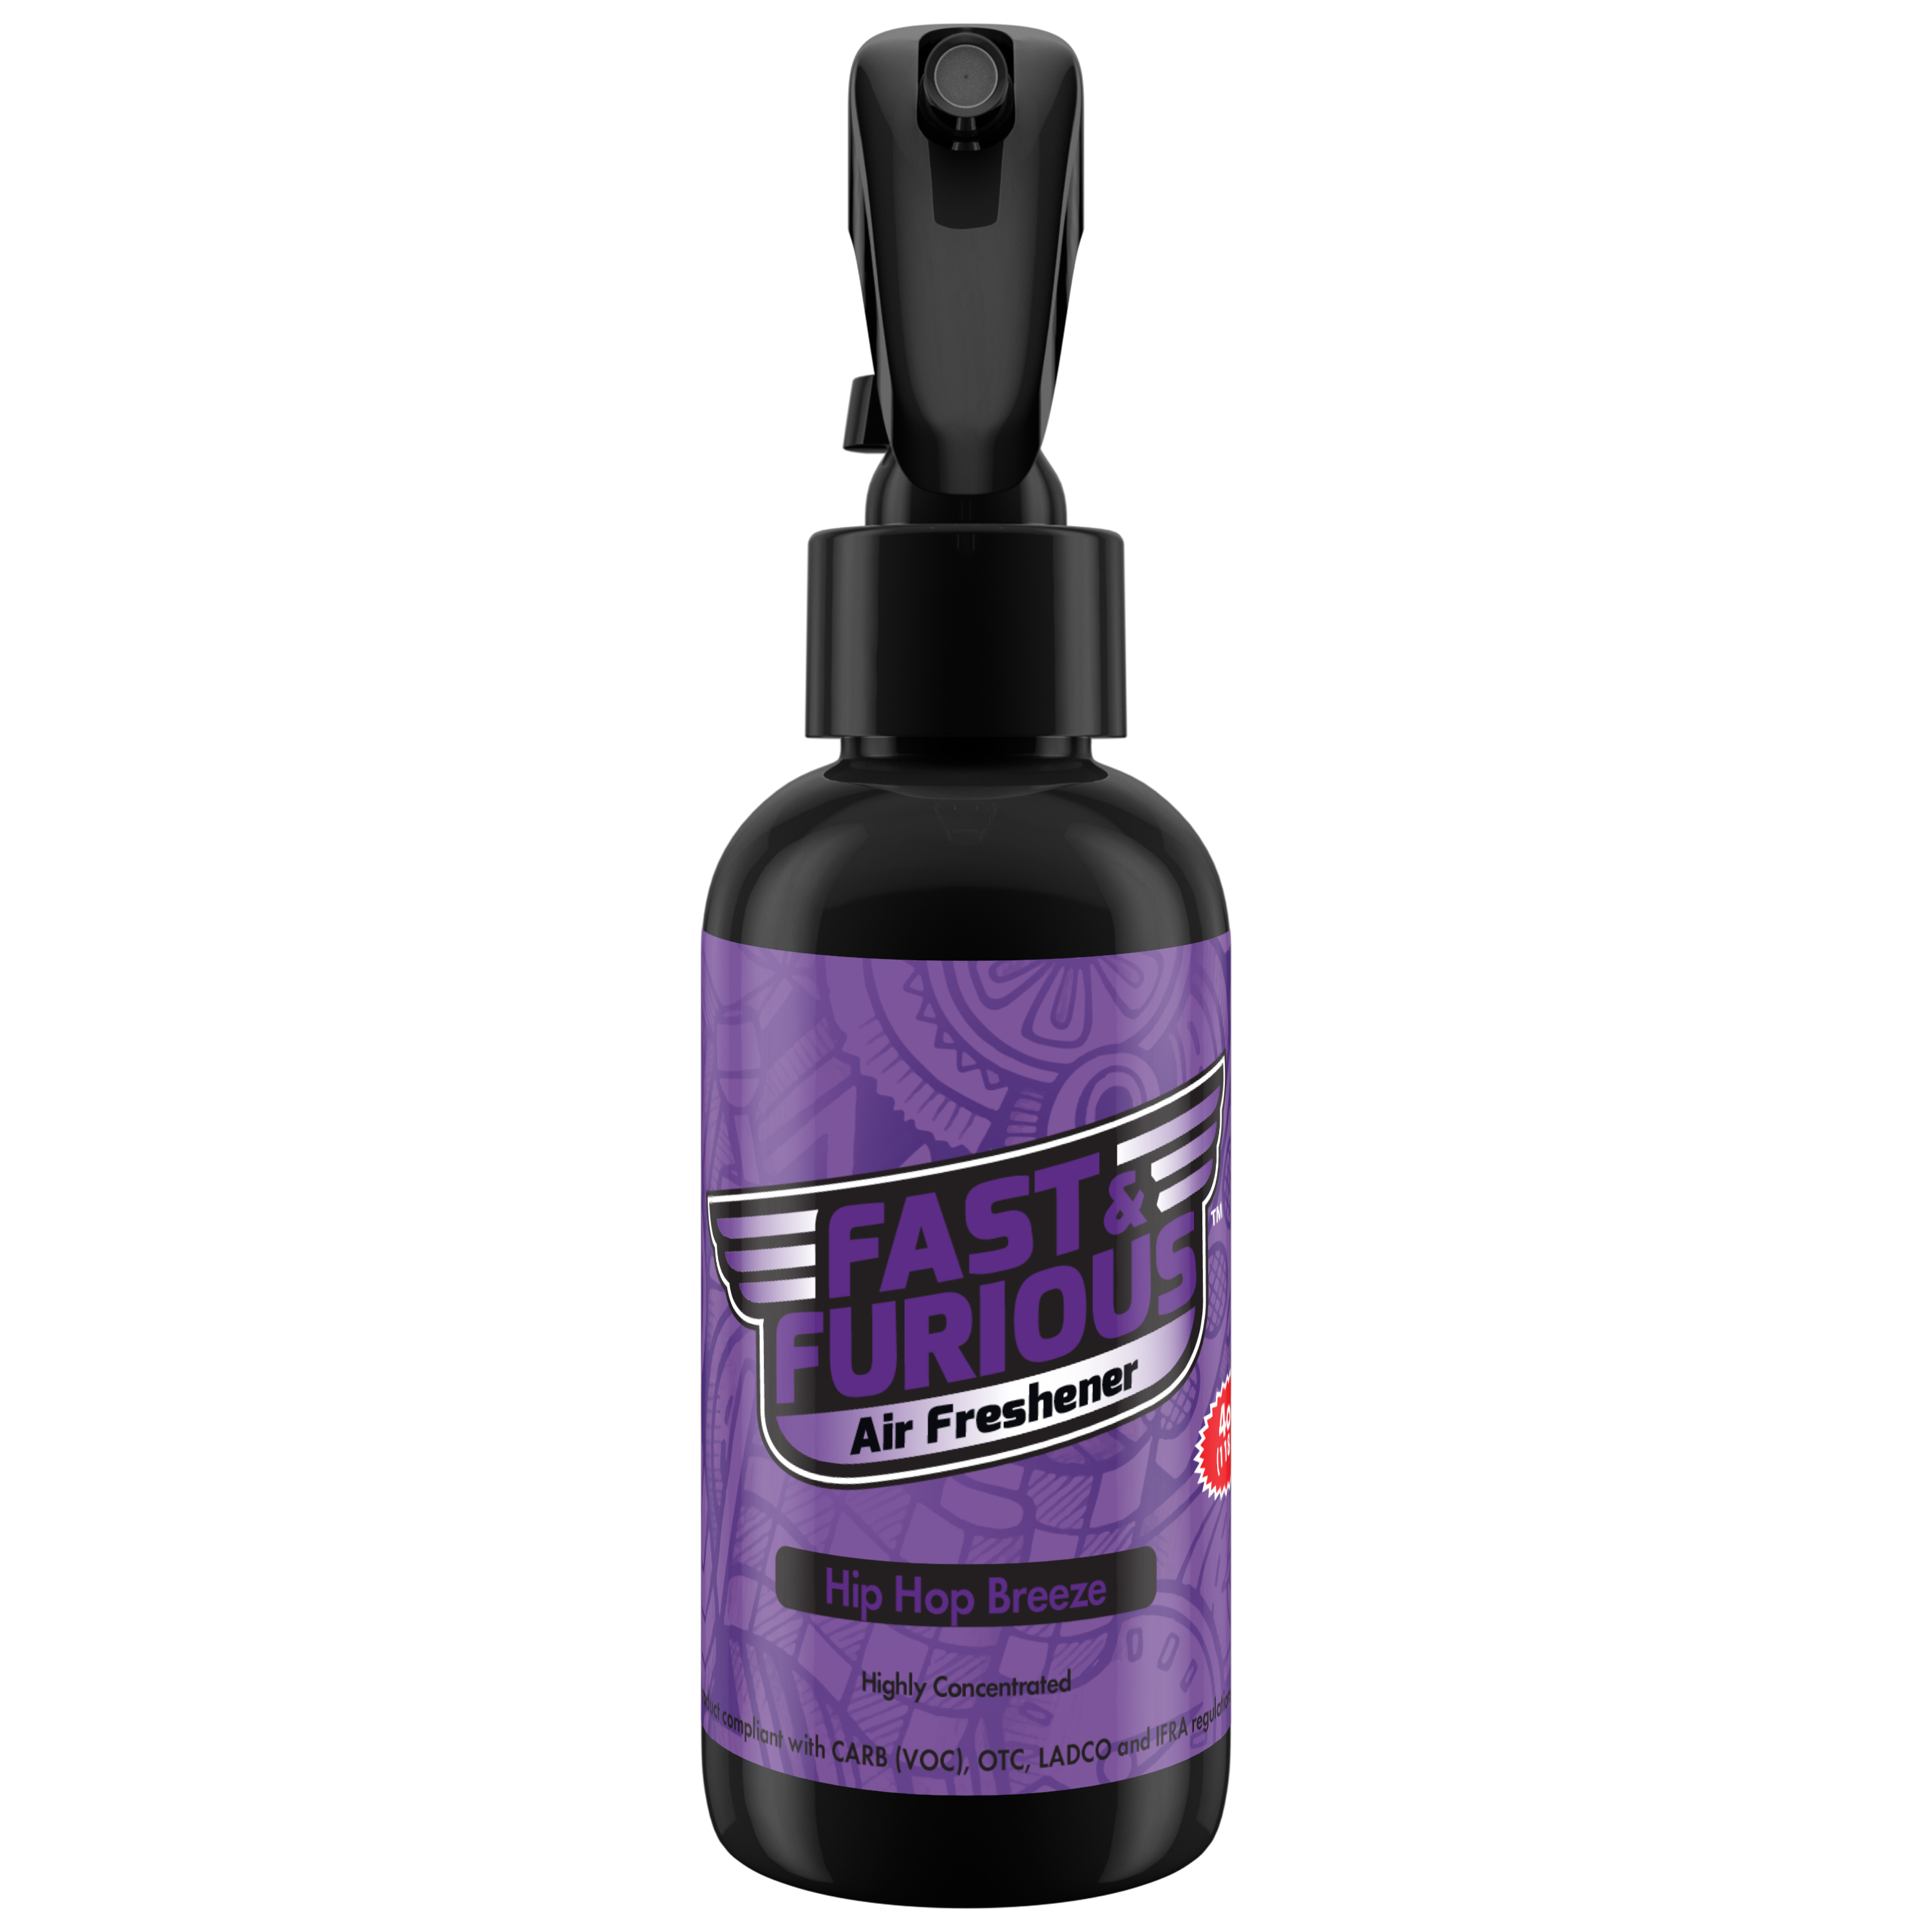 Fast and Furious Air Freshener - Hip Hop Breeze Scent